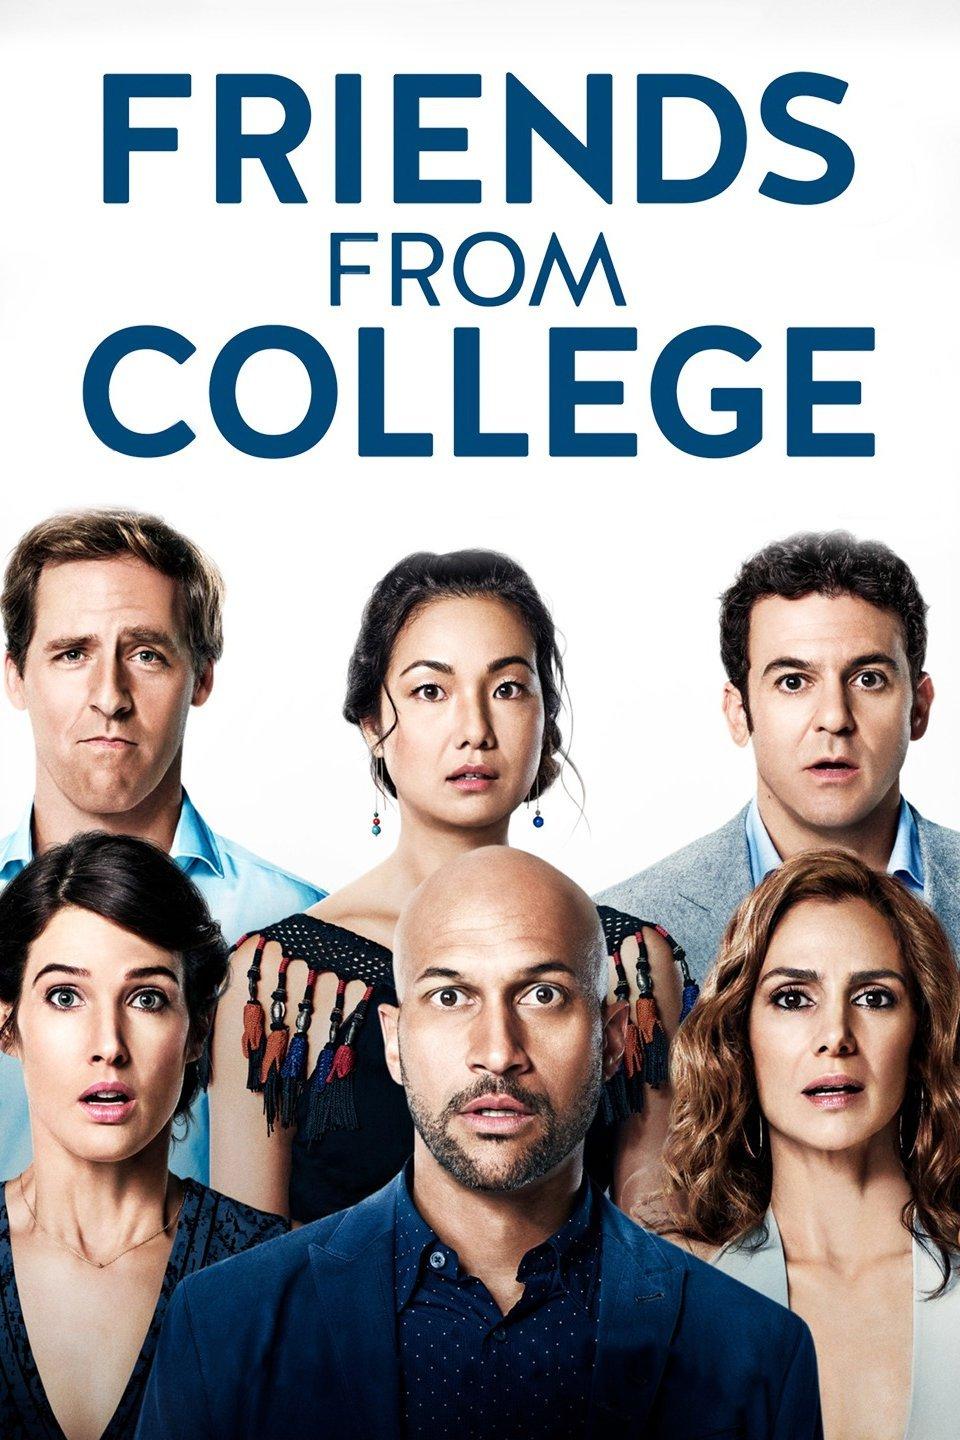 Image of "Friends from College" TV Show showing the six main characters in the series.